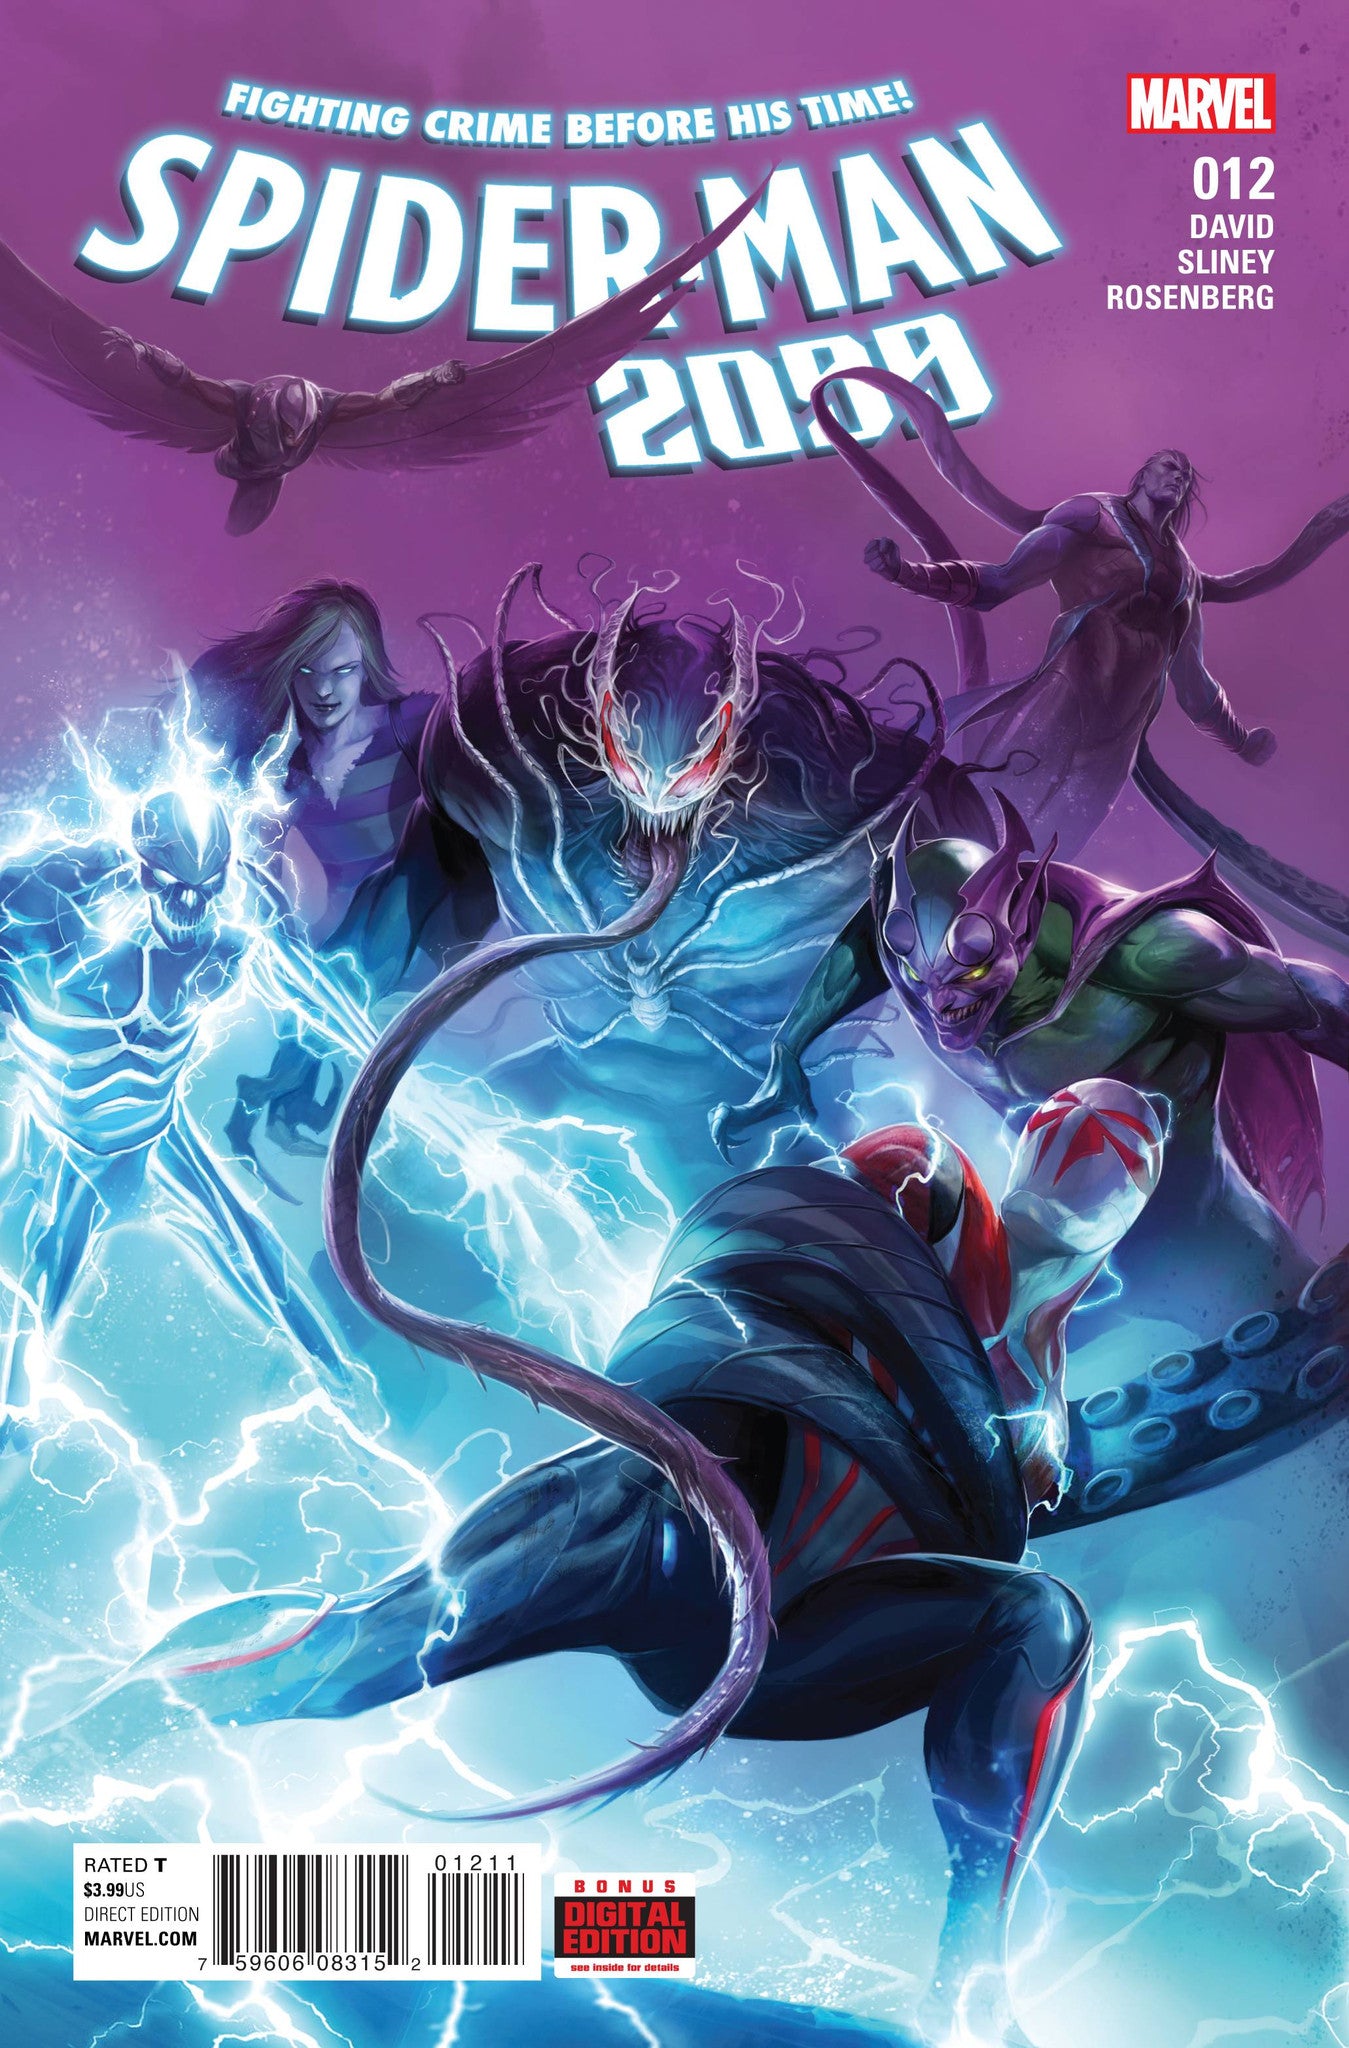 SPIDER-MAN 2099 #12 COVER